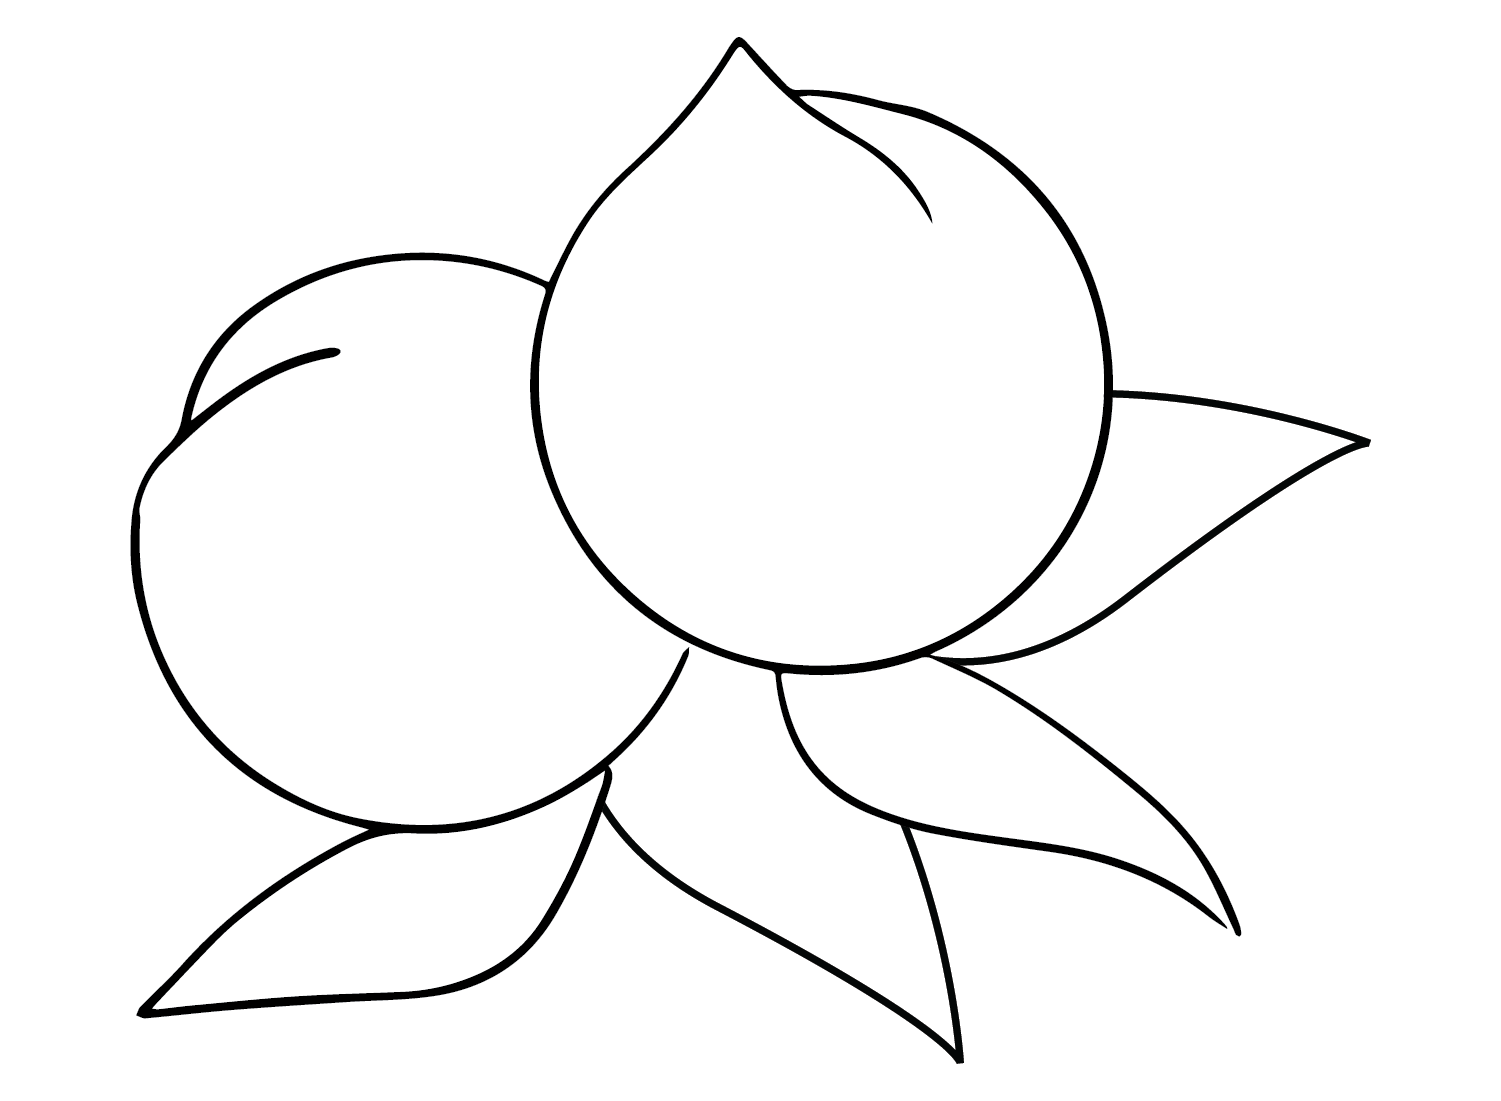 Nectarine Crisp Coloring Page